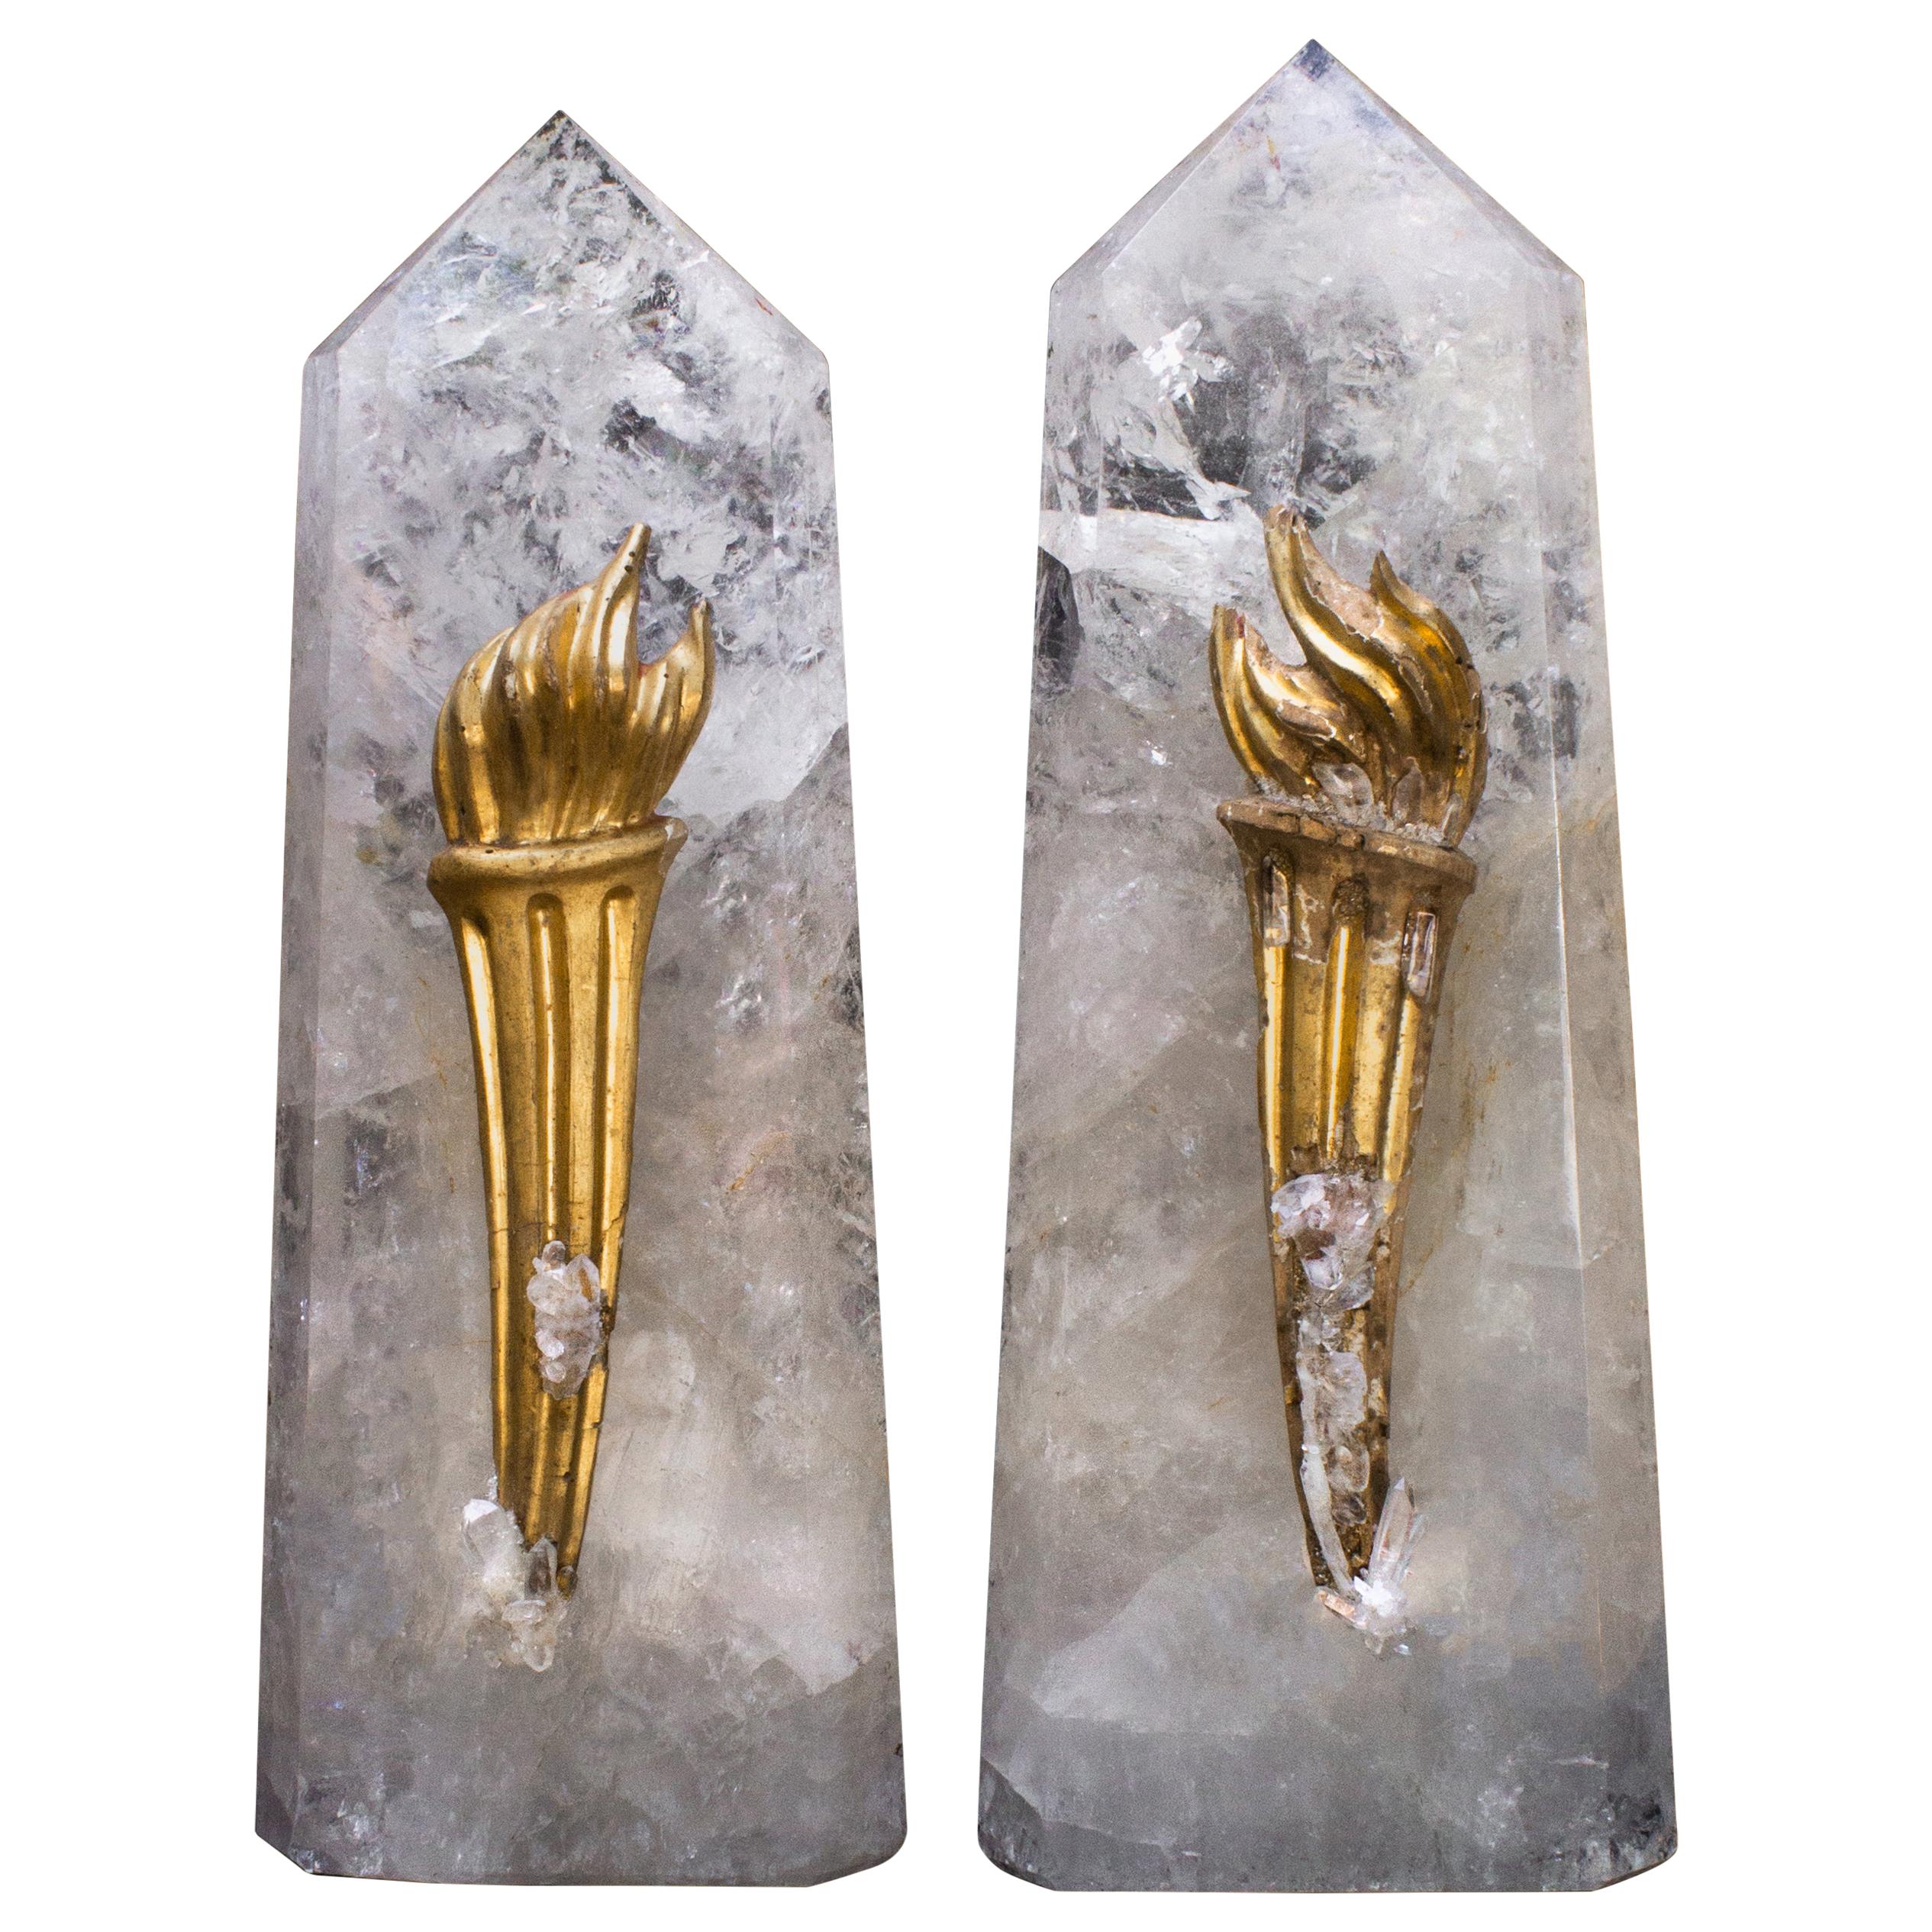 Pair of polished oblique quartz crystal points with matching 18th century Italian gold leaf torch fragments decorated with crystal quartz points and faden crystals. 

The 18th century torch fragments originally came from a church in Tuscany. They